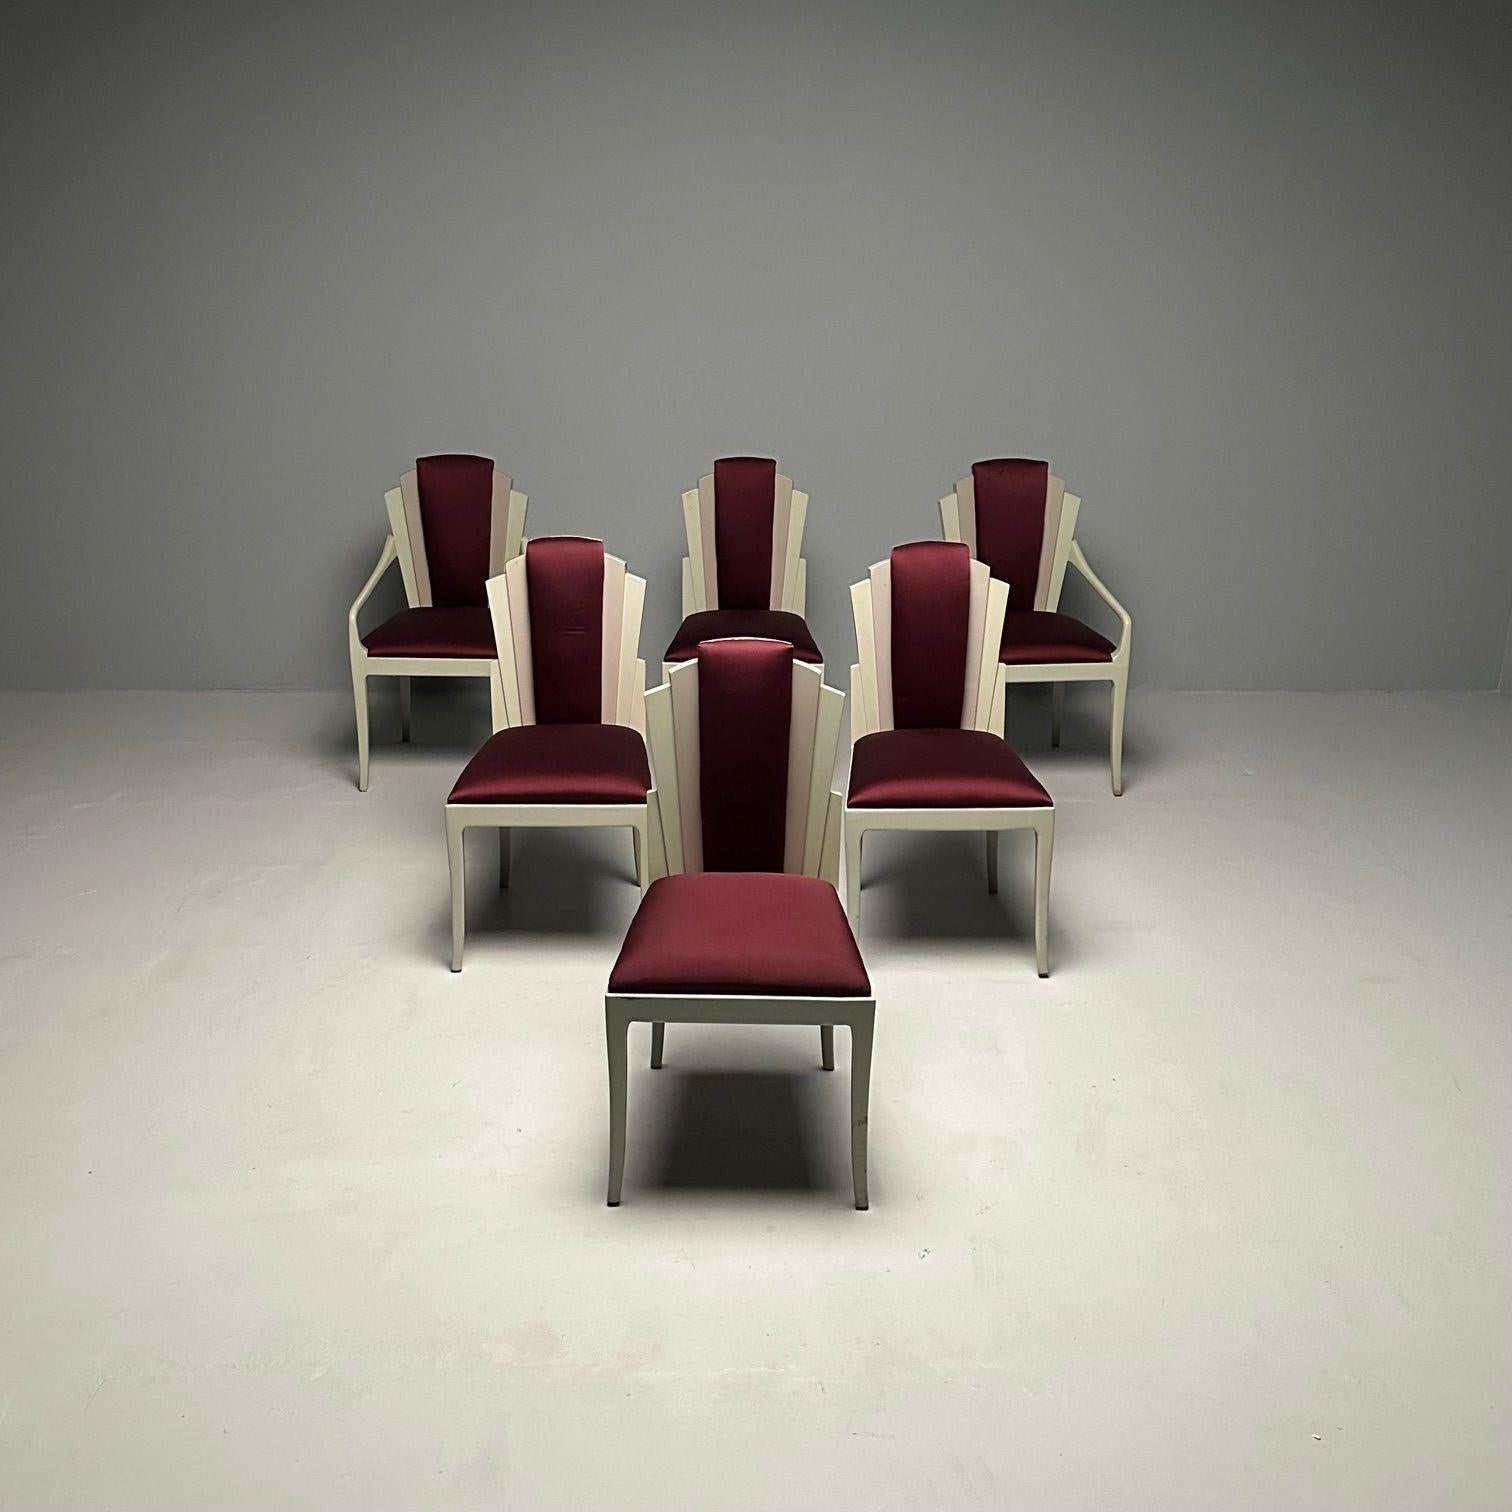 Vladimir Kagan Mid-Century Modern, Six Eva Dining Chairs, Lacquer, Maroon Fabric In Good Condition For Sale In Stamford, CT